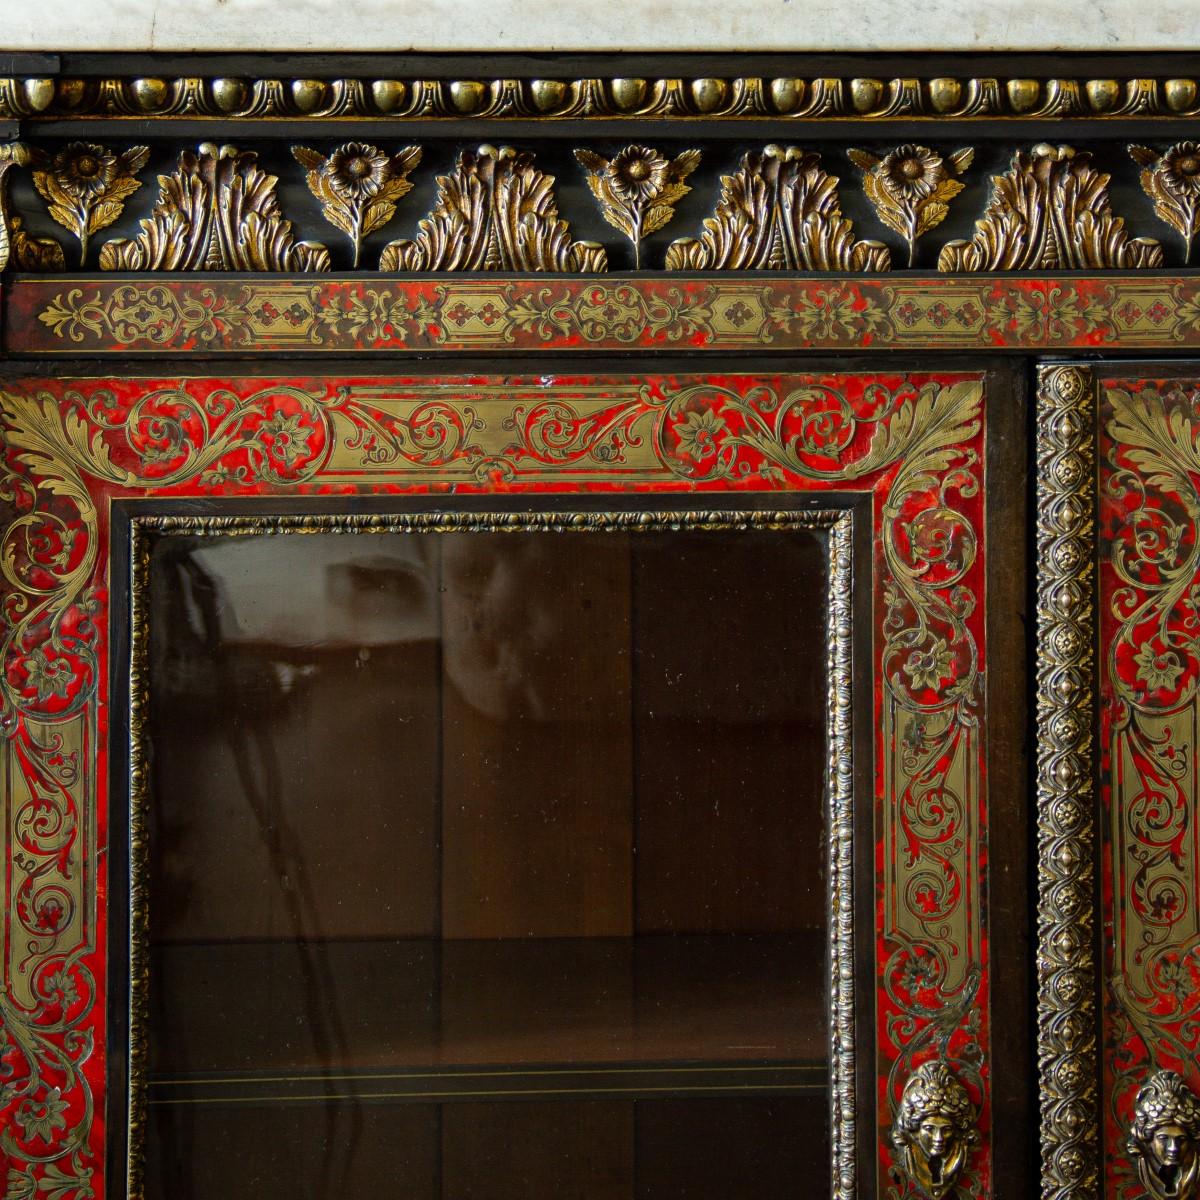 A 19th century French boulle cabinet with ormolu mounts, and finely worked inlay in engraved brass on red under laid tortoiseshell. The two doors are glazed revealing shelving.

Elaborately decorated with floral and foliage decoration, punctuated